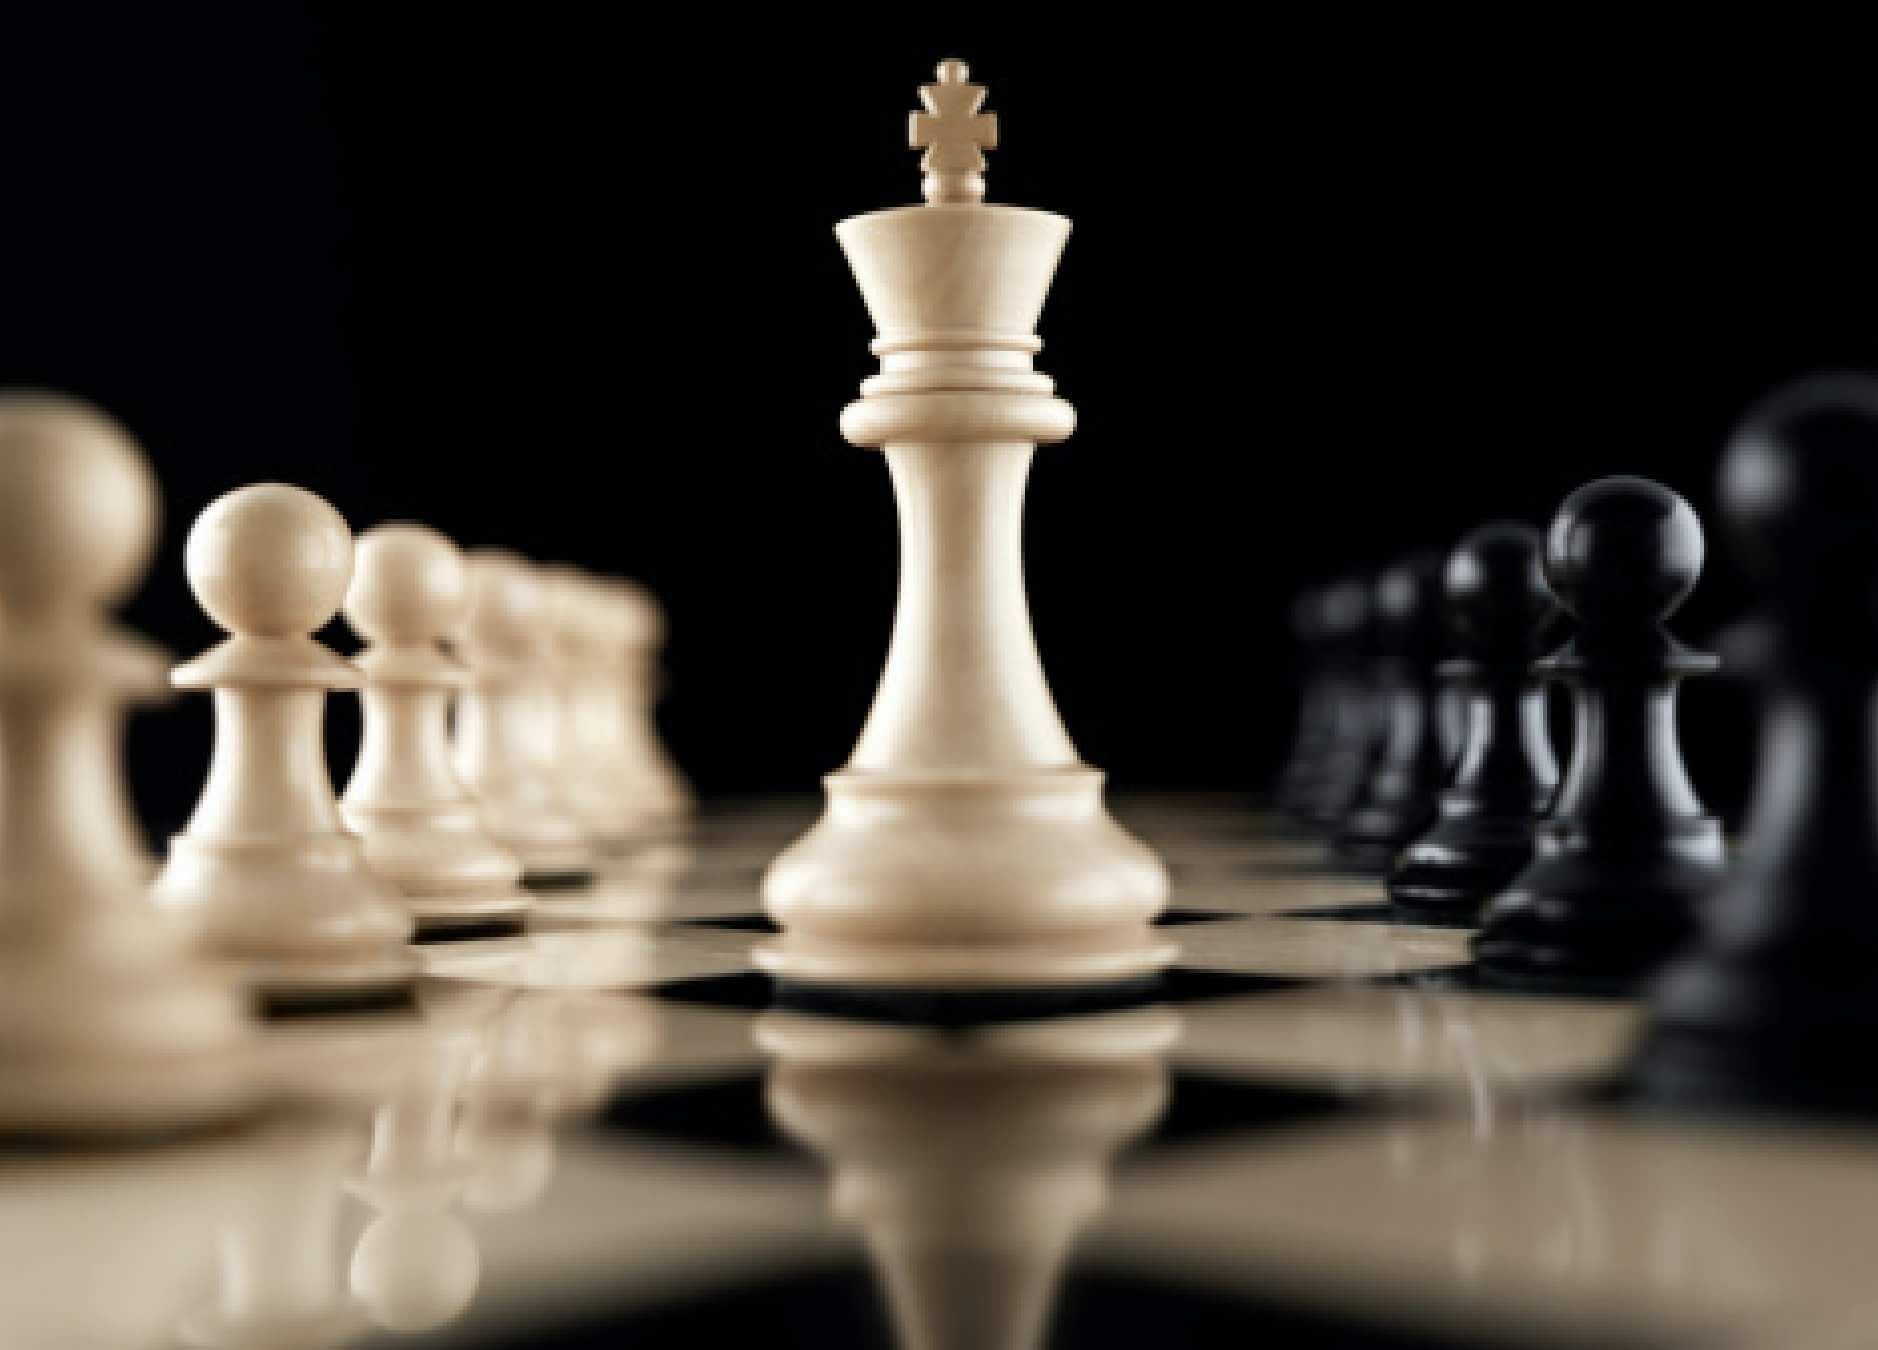 ADOW - 'There's more to the game than protecting your queen, ' Hamish said. 'Why do you find it so difficult to. King chess piece, Chess board, Queen chess piece